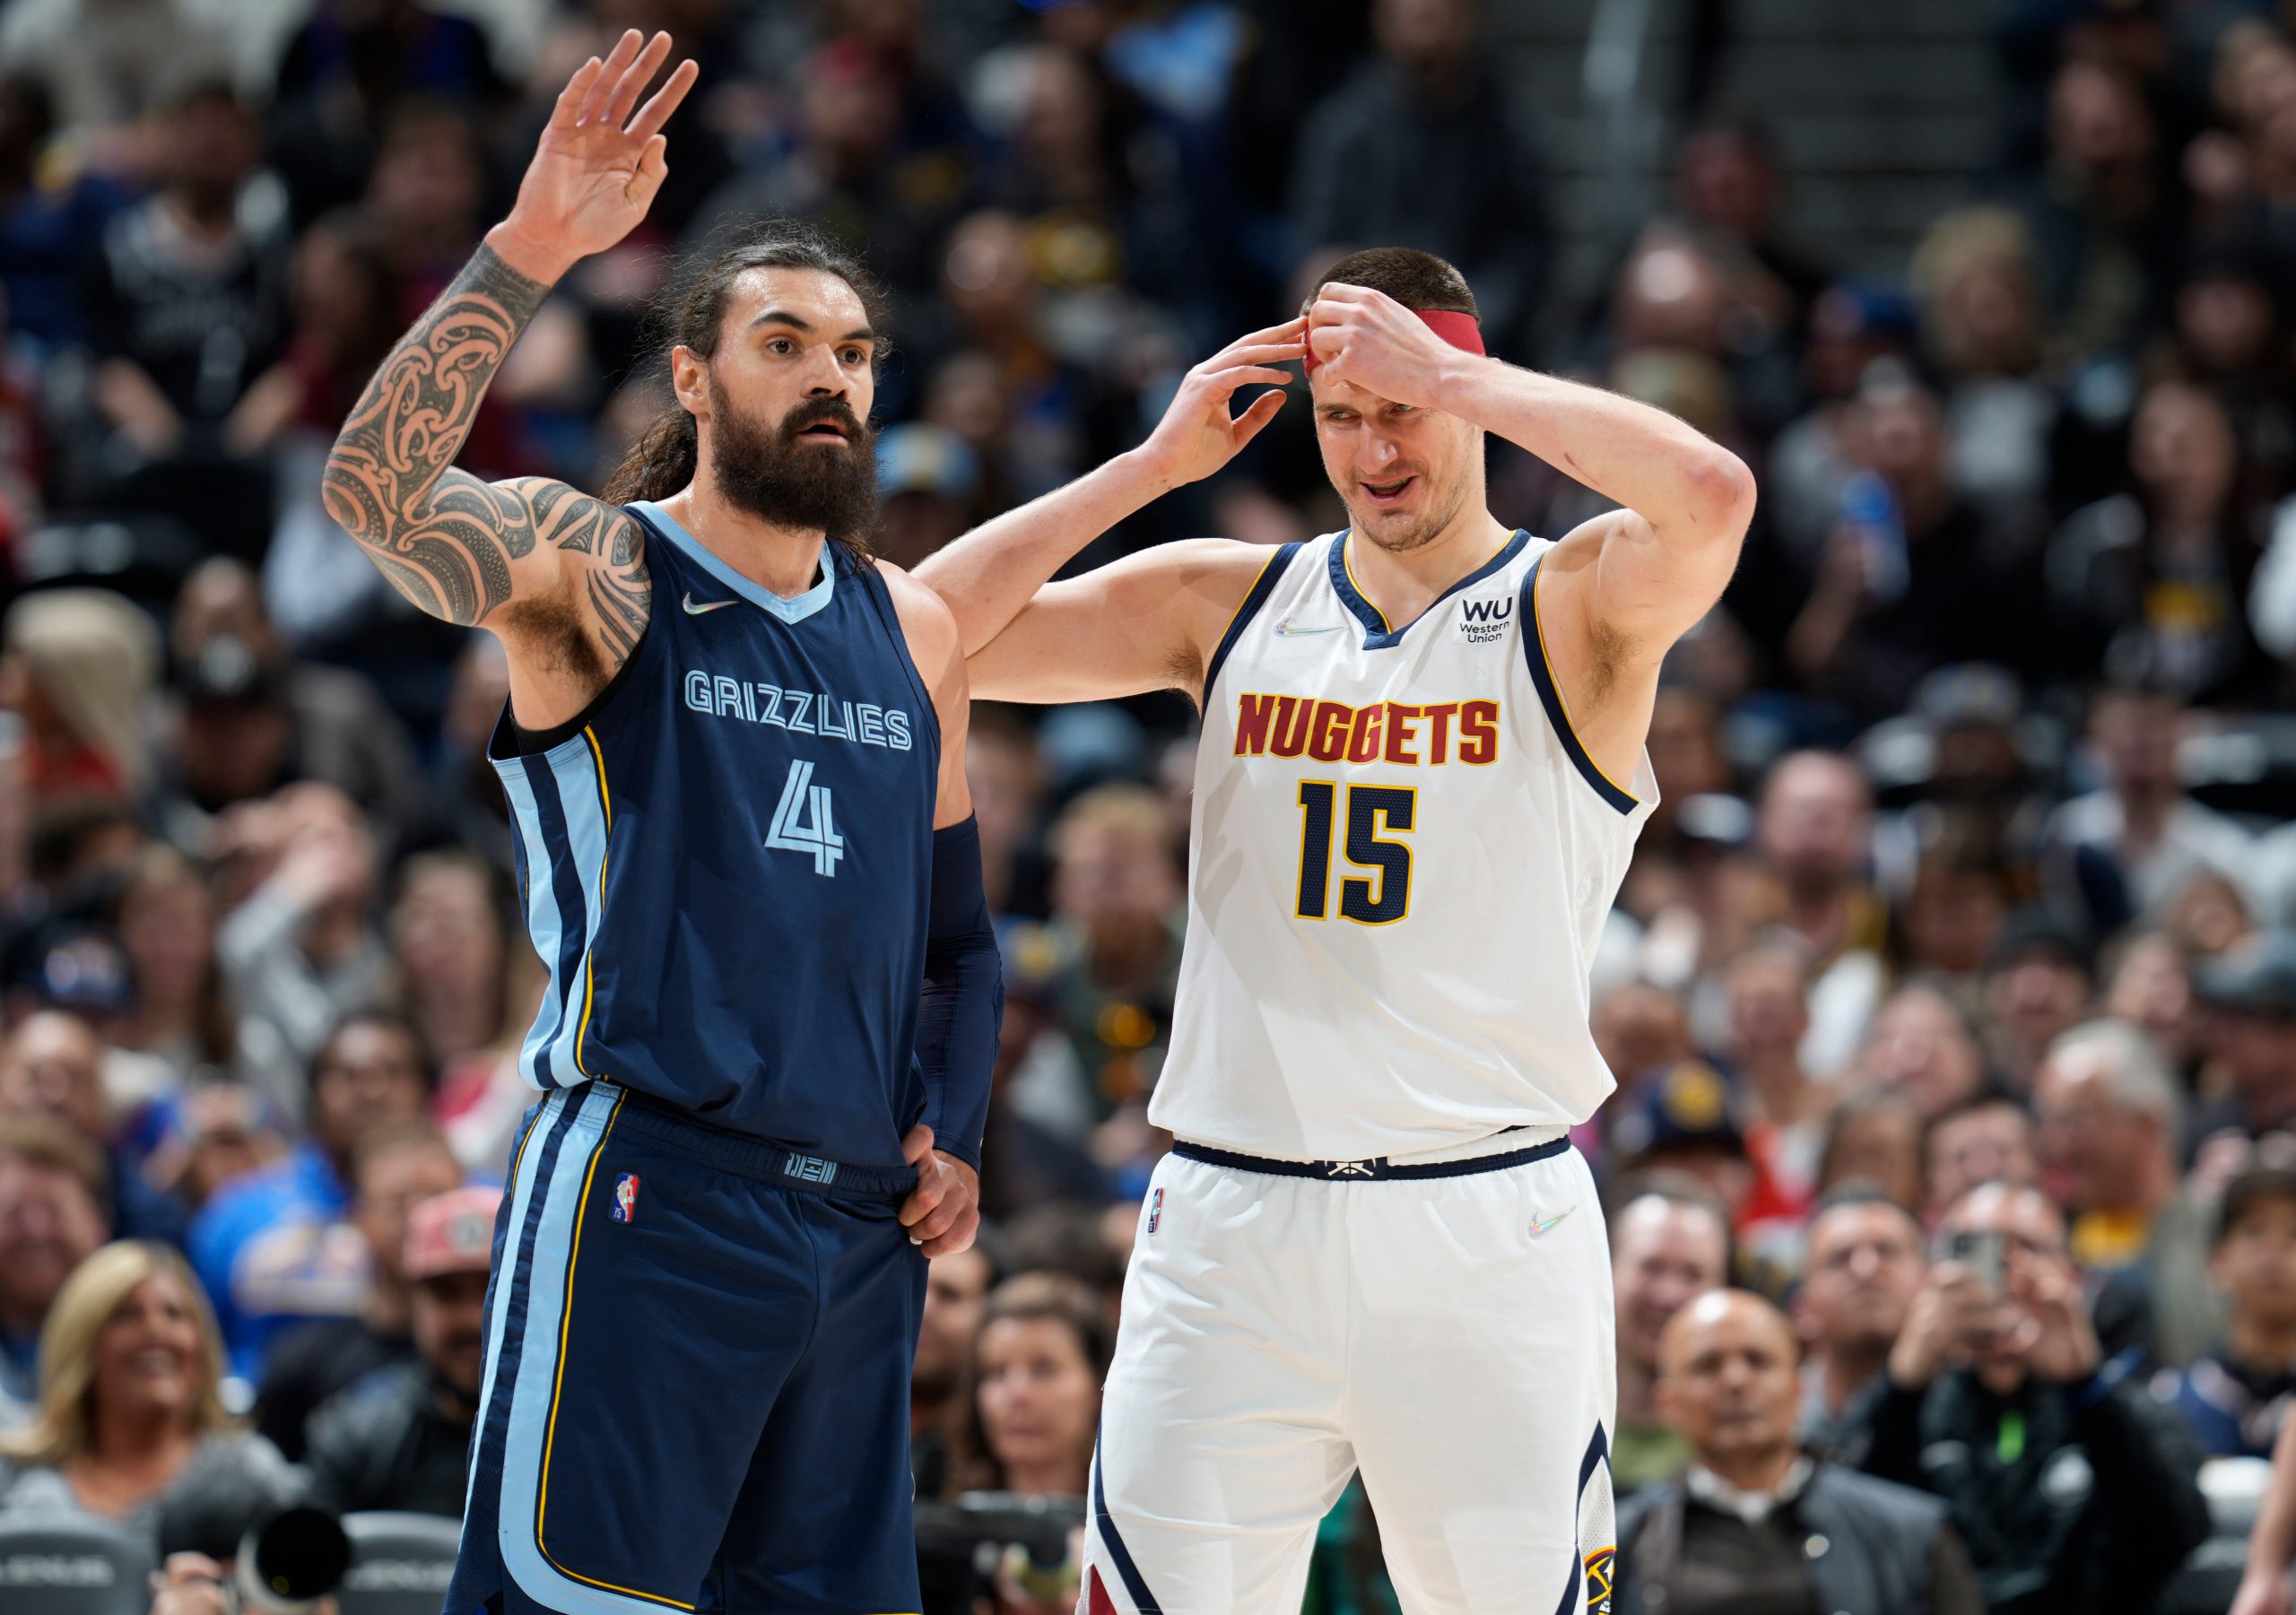 NBA: Nikola Jokic leads Denver Nuggets to playoff berth, first with 2K points, 1K rebounds, 500 assists